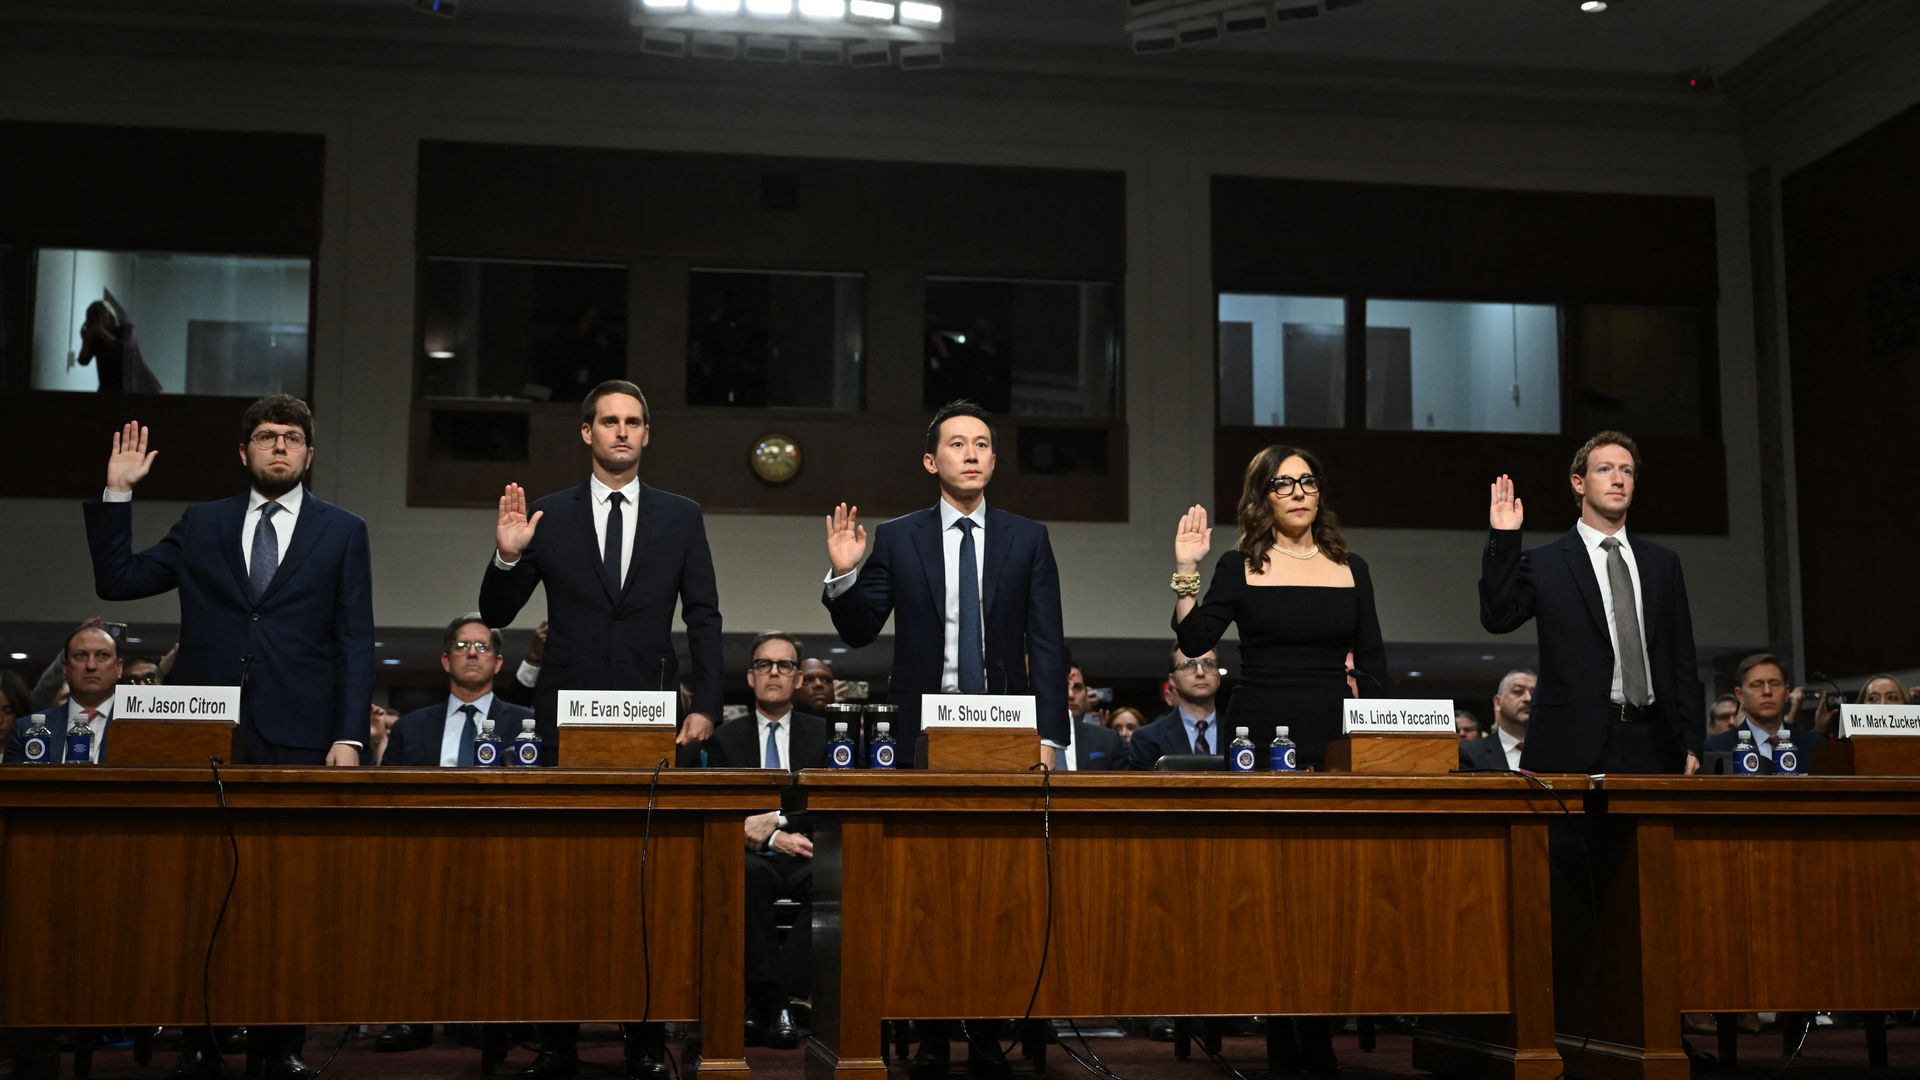 Jason Citron, CEO of Discord; Evan Spiegel, CEO of Snap; Shou Zi Chew, CEO of TikTok; Linda Yaccarino, CEO of X; and Mark Zuckerberg, CEO of Meta, are sworn in during the US Senate Judiciary Committee hearing on January 31, 2024.